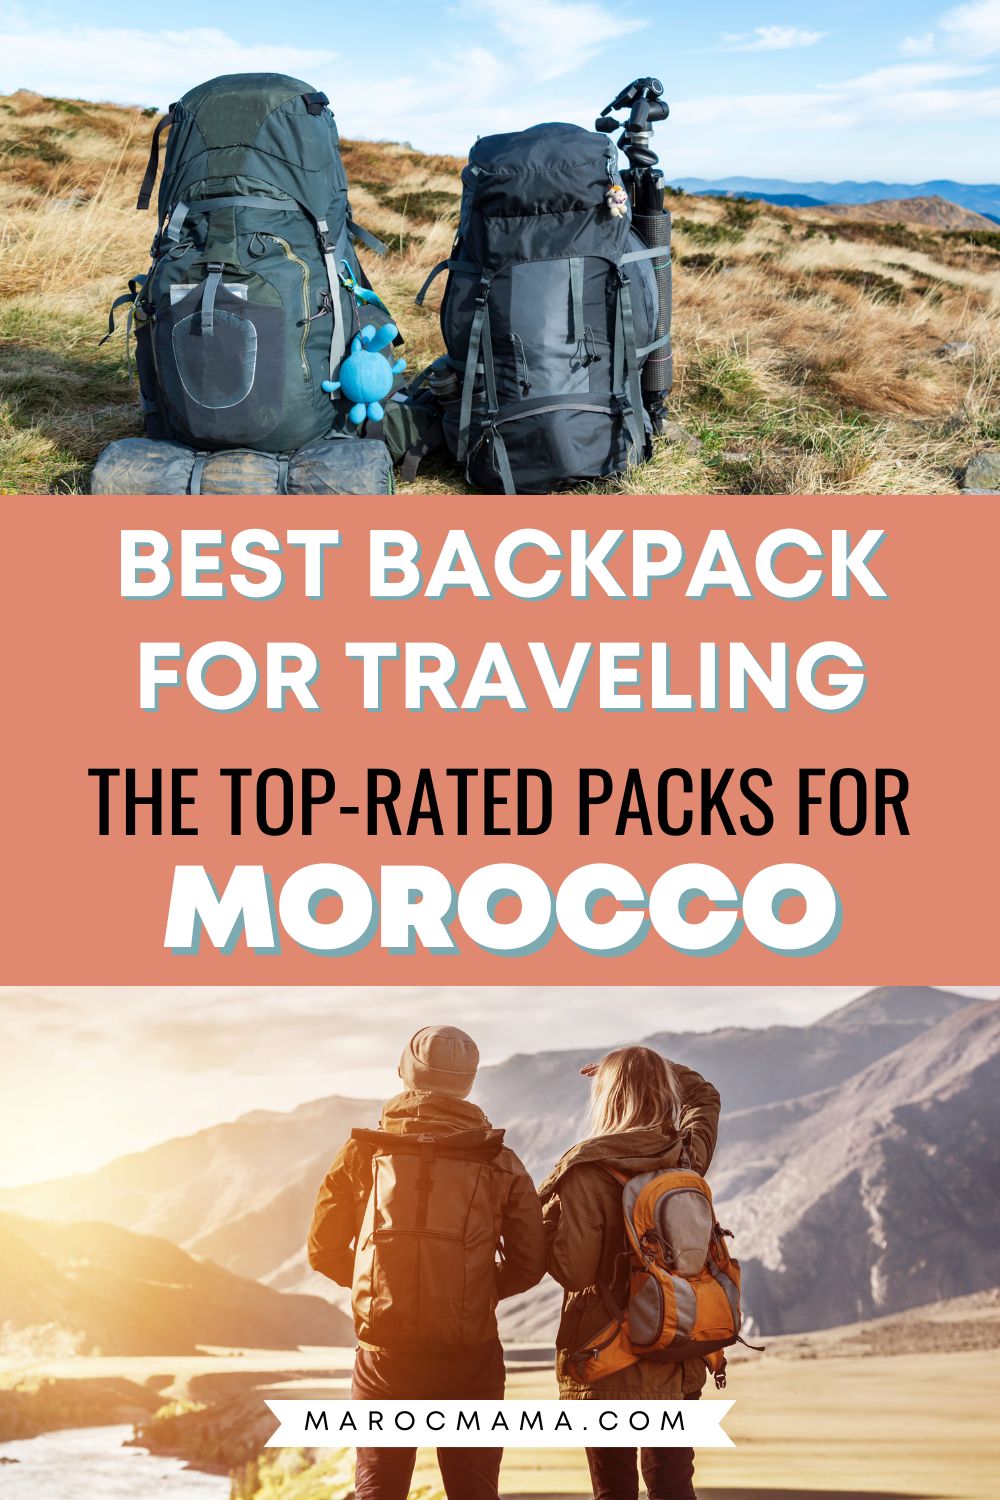 Top image is 2 backpacks placed on the ground and bottom image is a man and a woman carrying backpacks looking at the sunset with the text Best Backpack for Traveling The Top-Rated Packs for Morocco